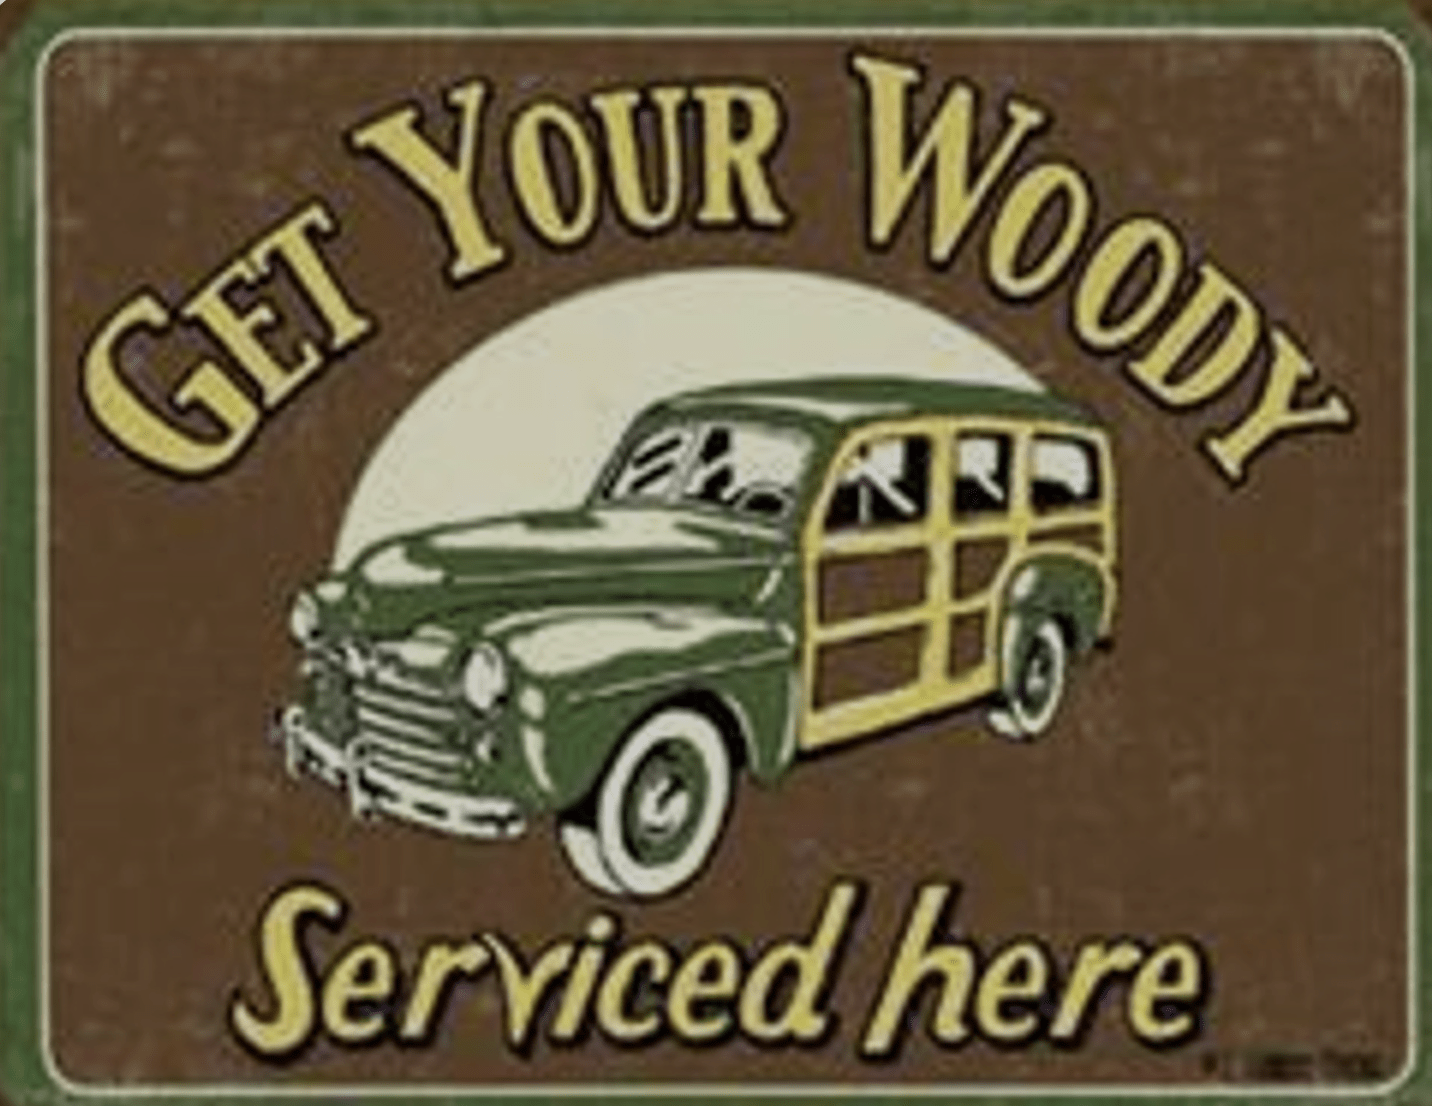 Sign reading 'get your woody serviced here'